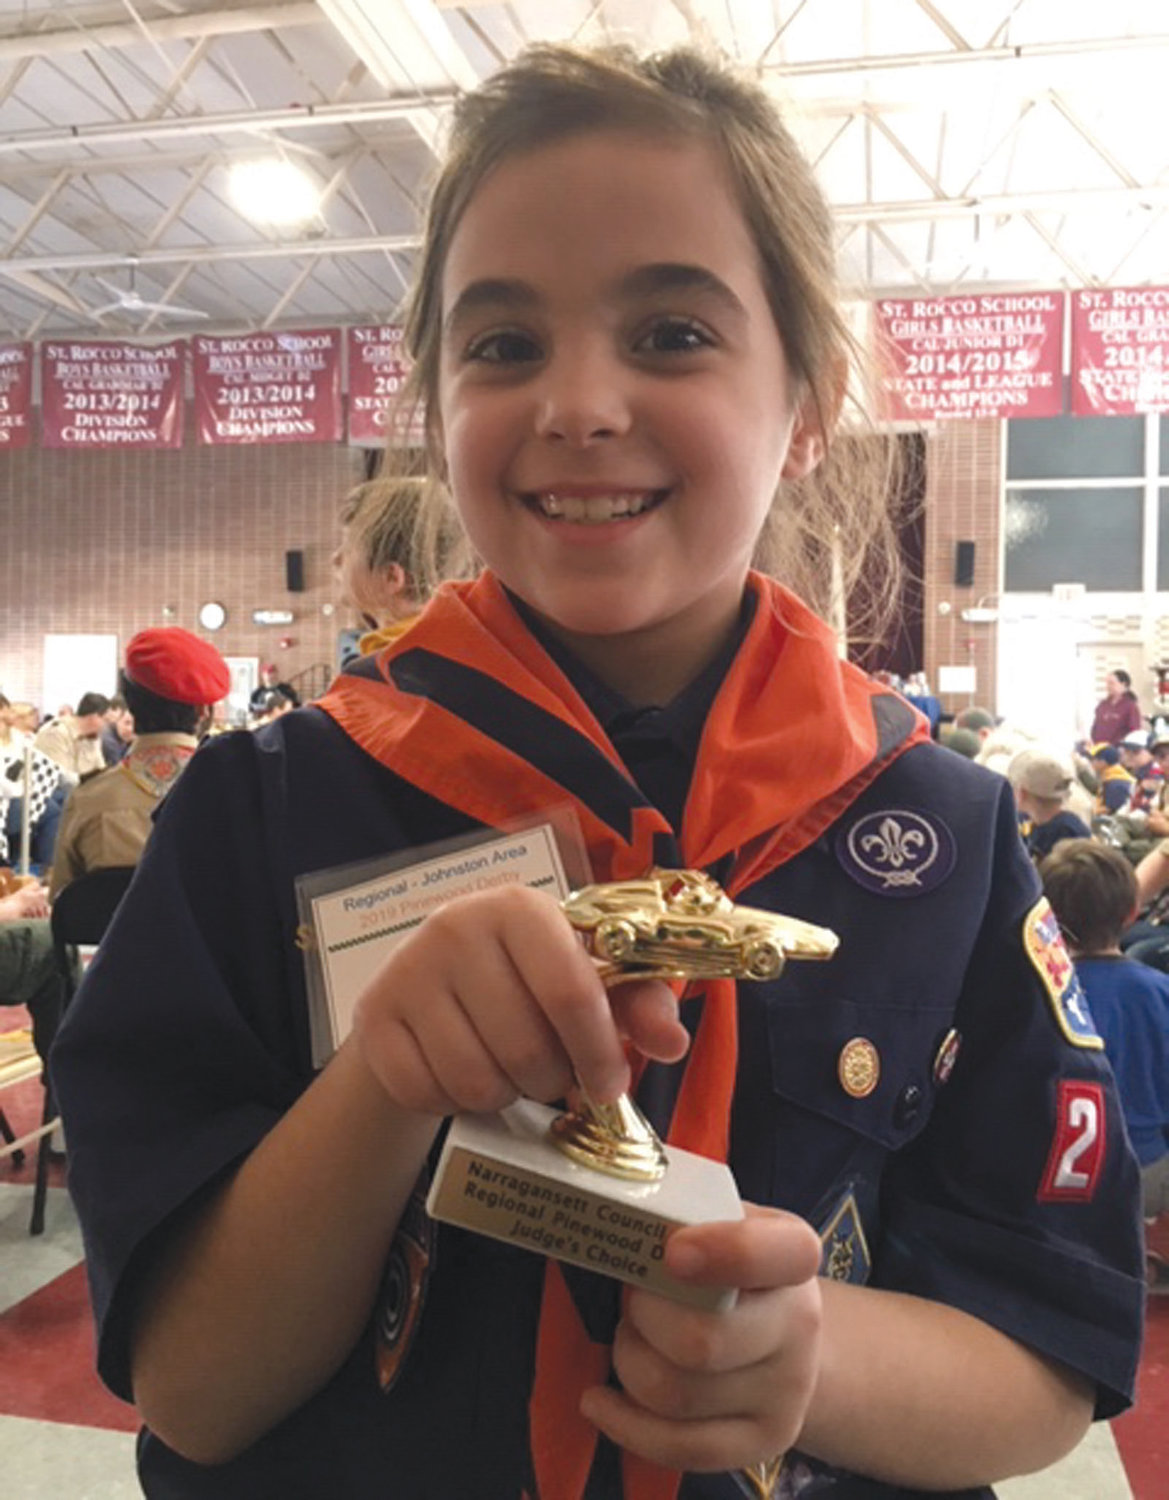 NOTHING BUT HAPPY: Johnston’s Ali LaFazia proudly holds her award for Judge’s Choice in design during the Pinewood Derby Regionals in March. Ali, via her mother Sheri, said her favorite aspects of Boy Scouts include hiking, fishing and camping.